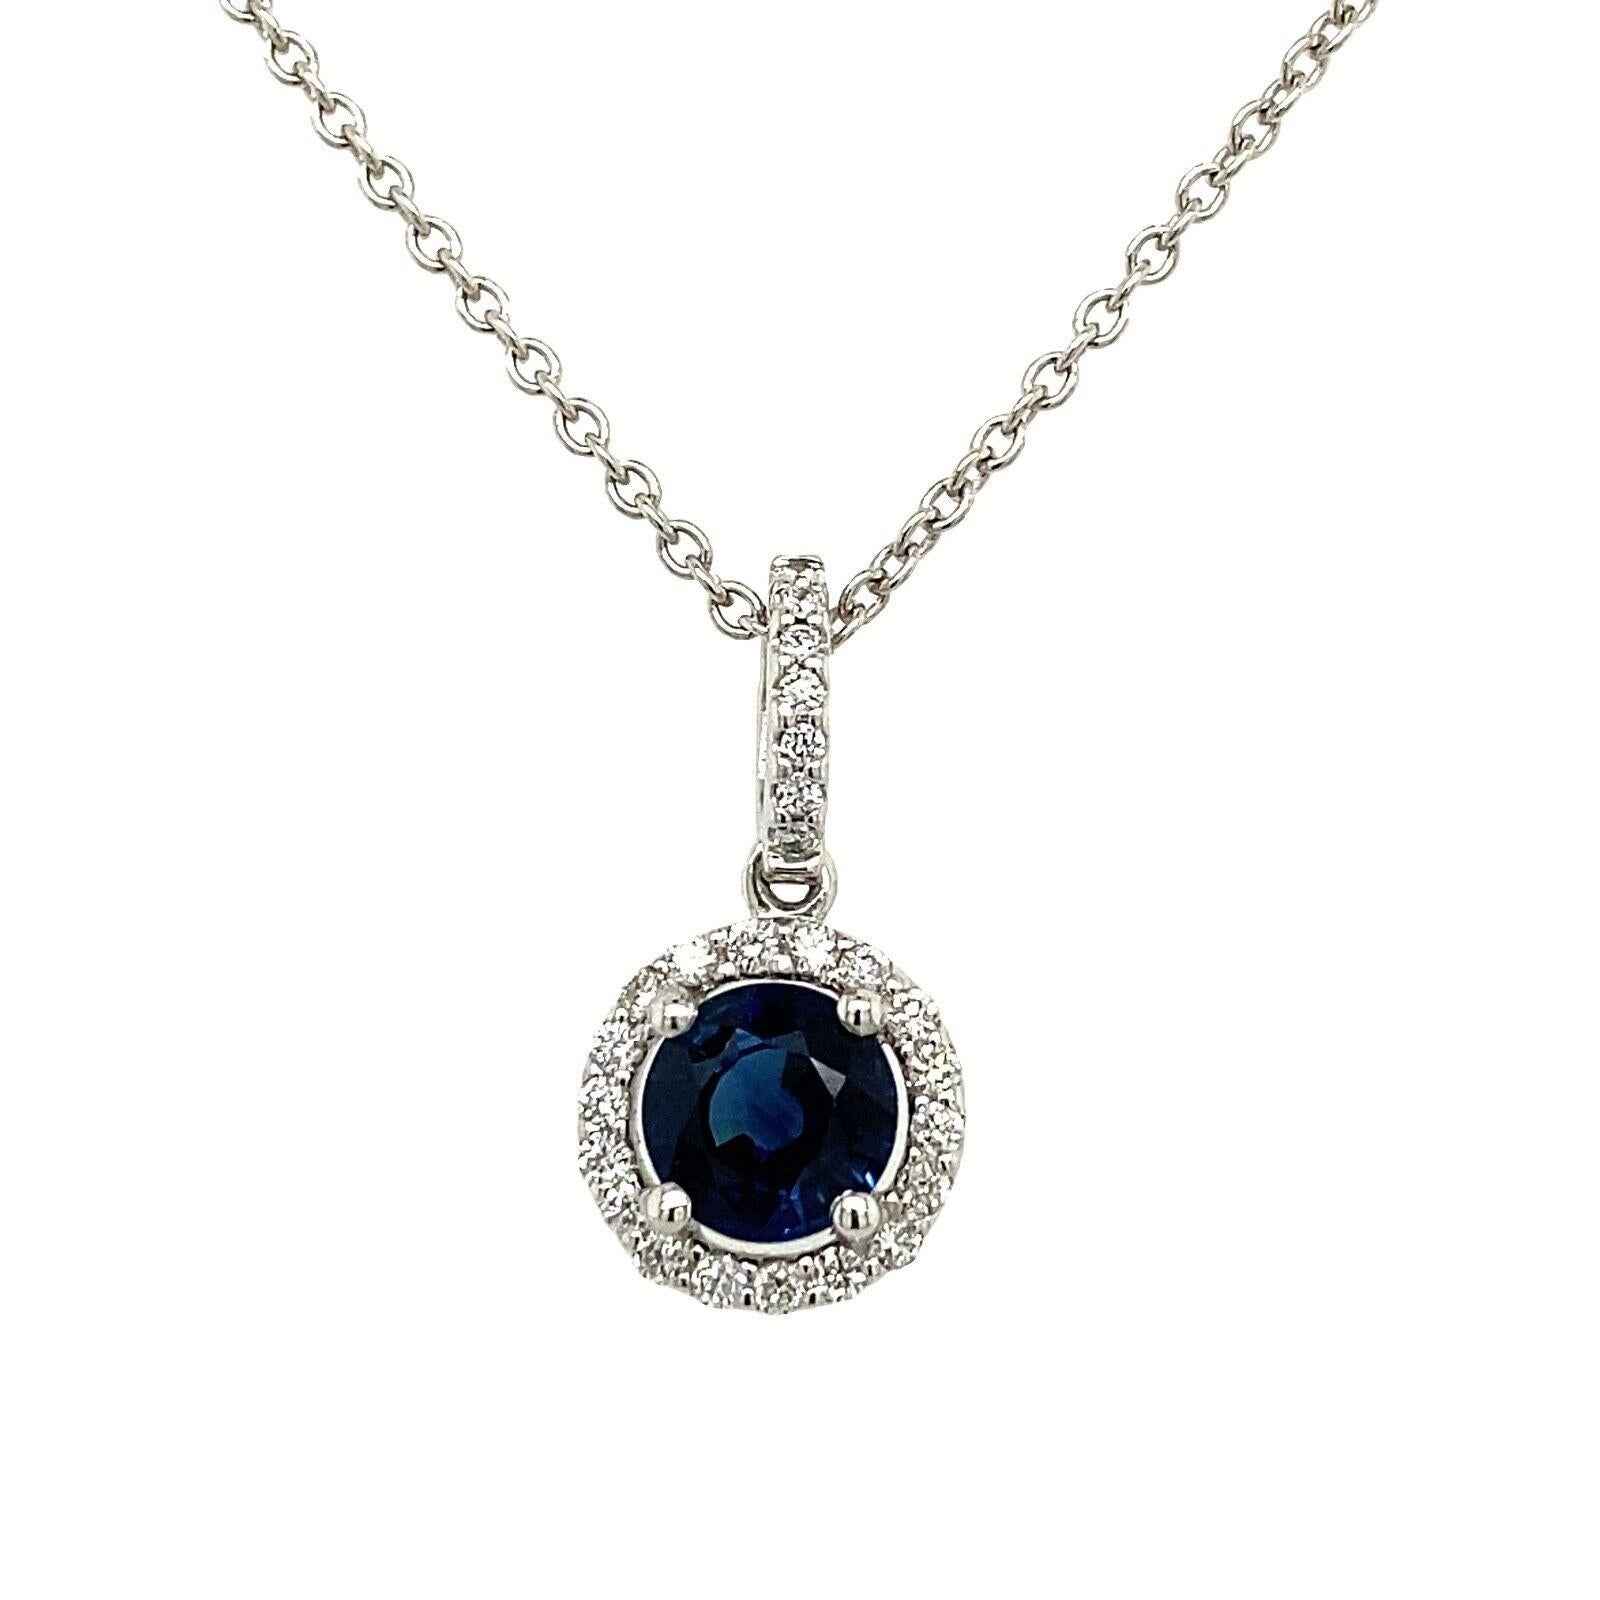 18ct White Gold 0.75ct Sapphire surrounded by Diamonds on a White Gold Chain

A beautiful 0.75ct sapphire pendant surrounded by diamonds on a white gold chain. It's a timeless piece that can be worn with any outfit and is a beautiful accent